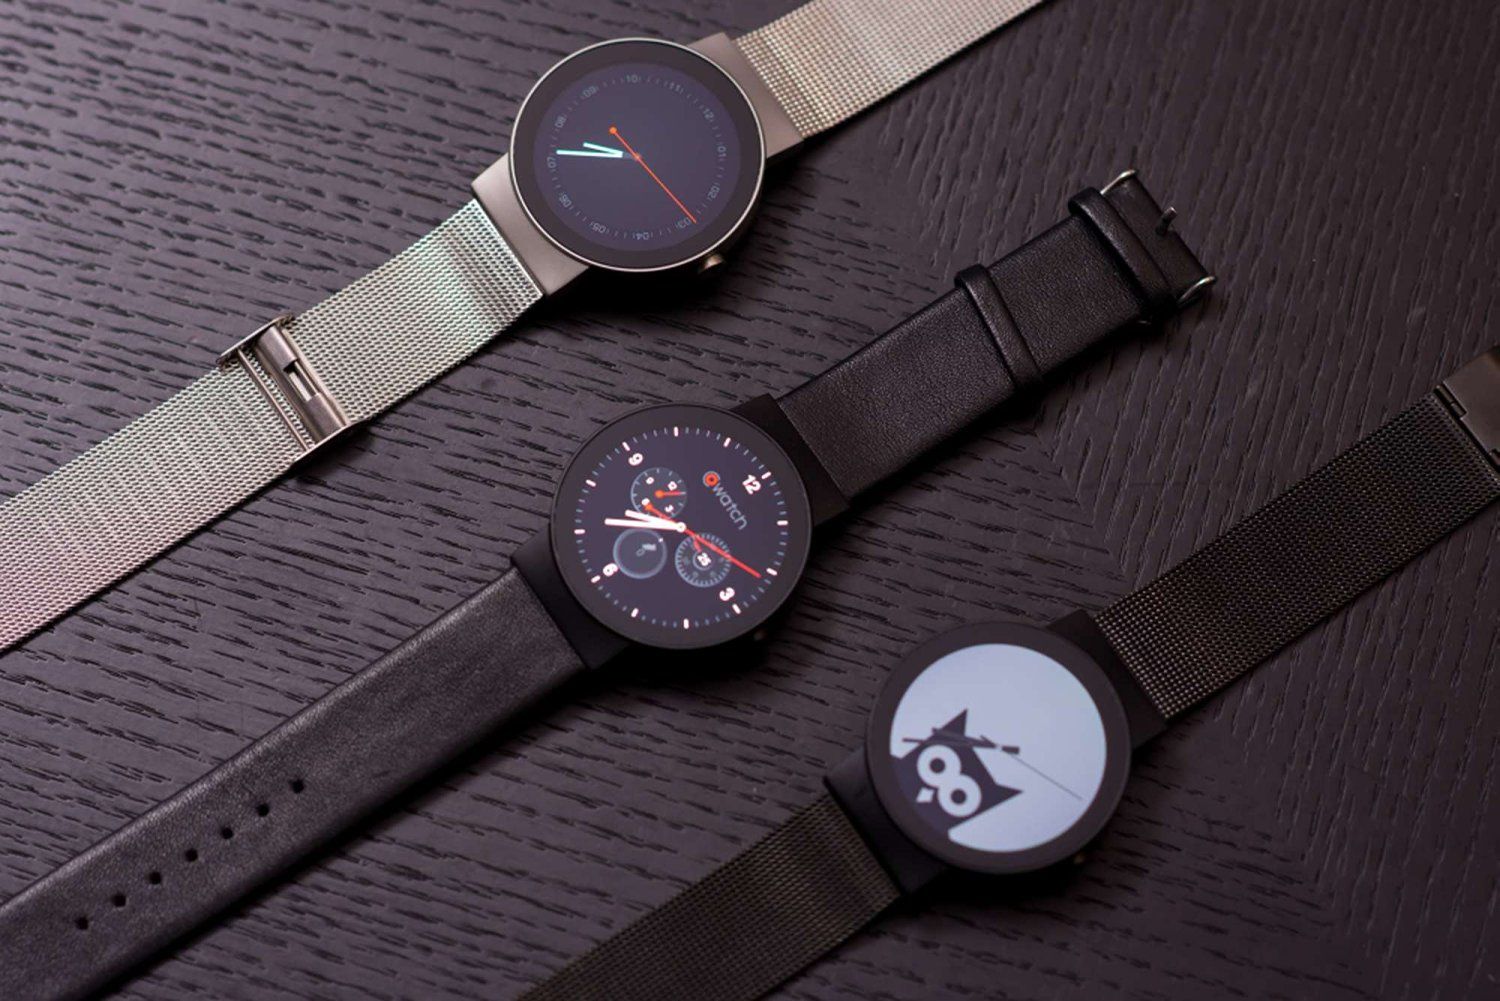 CoWatch smartwatch is the Amazon Echo for your wrist